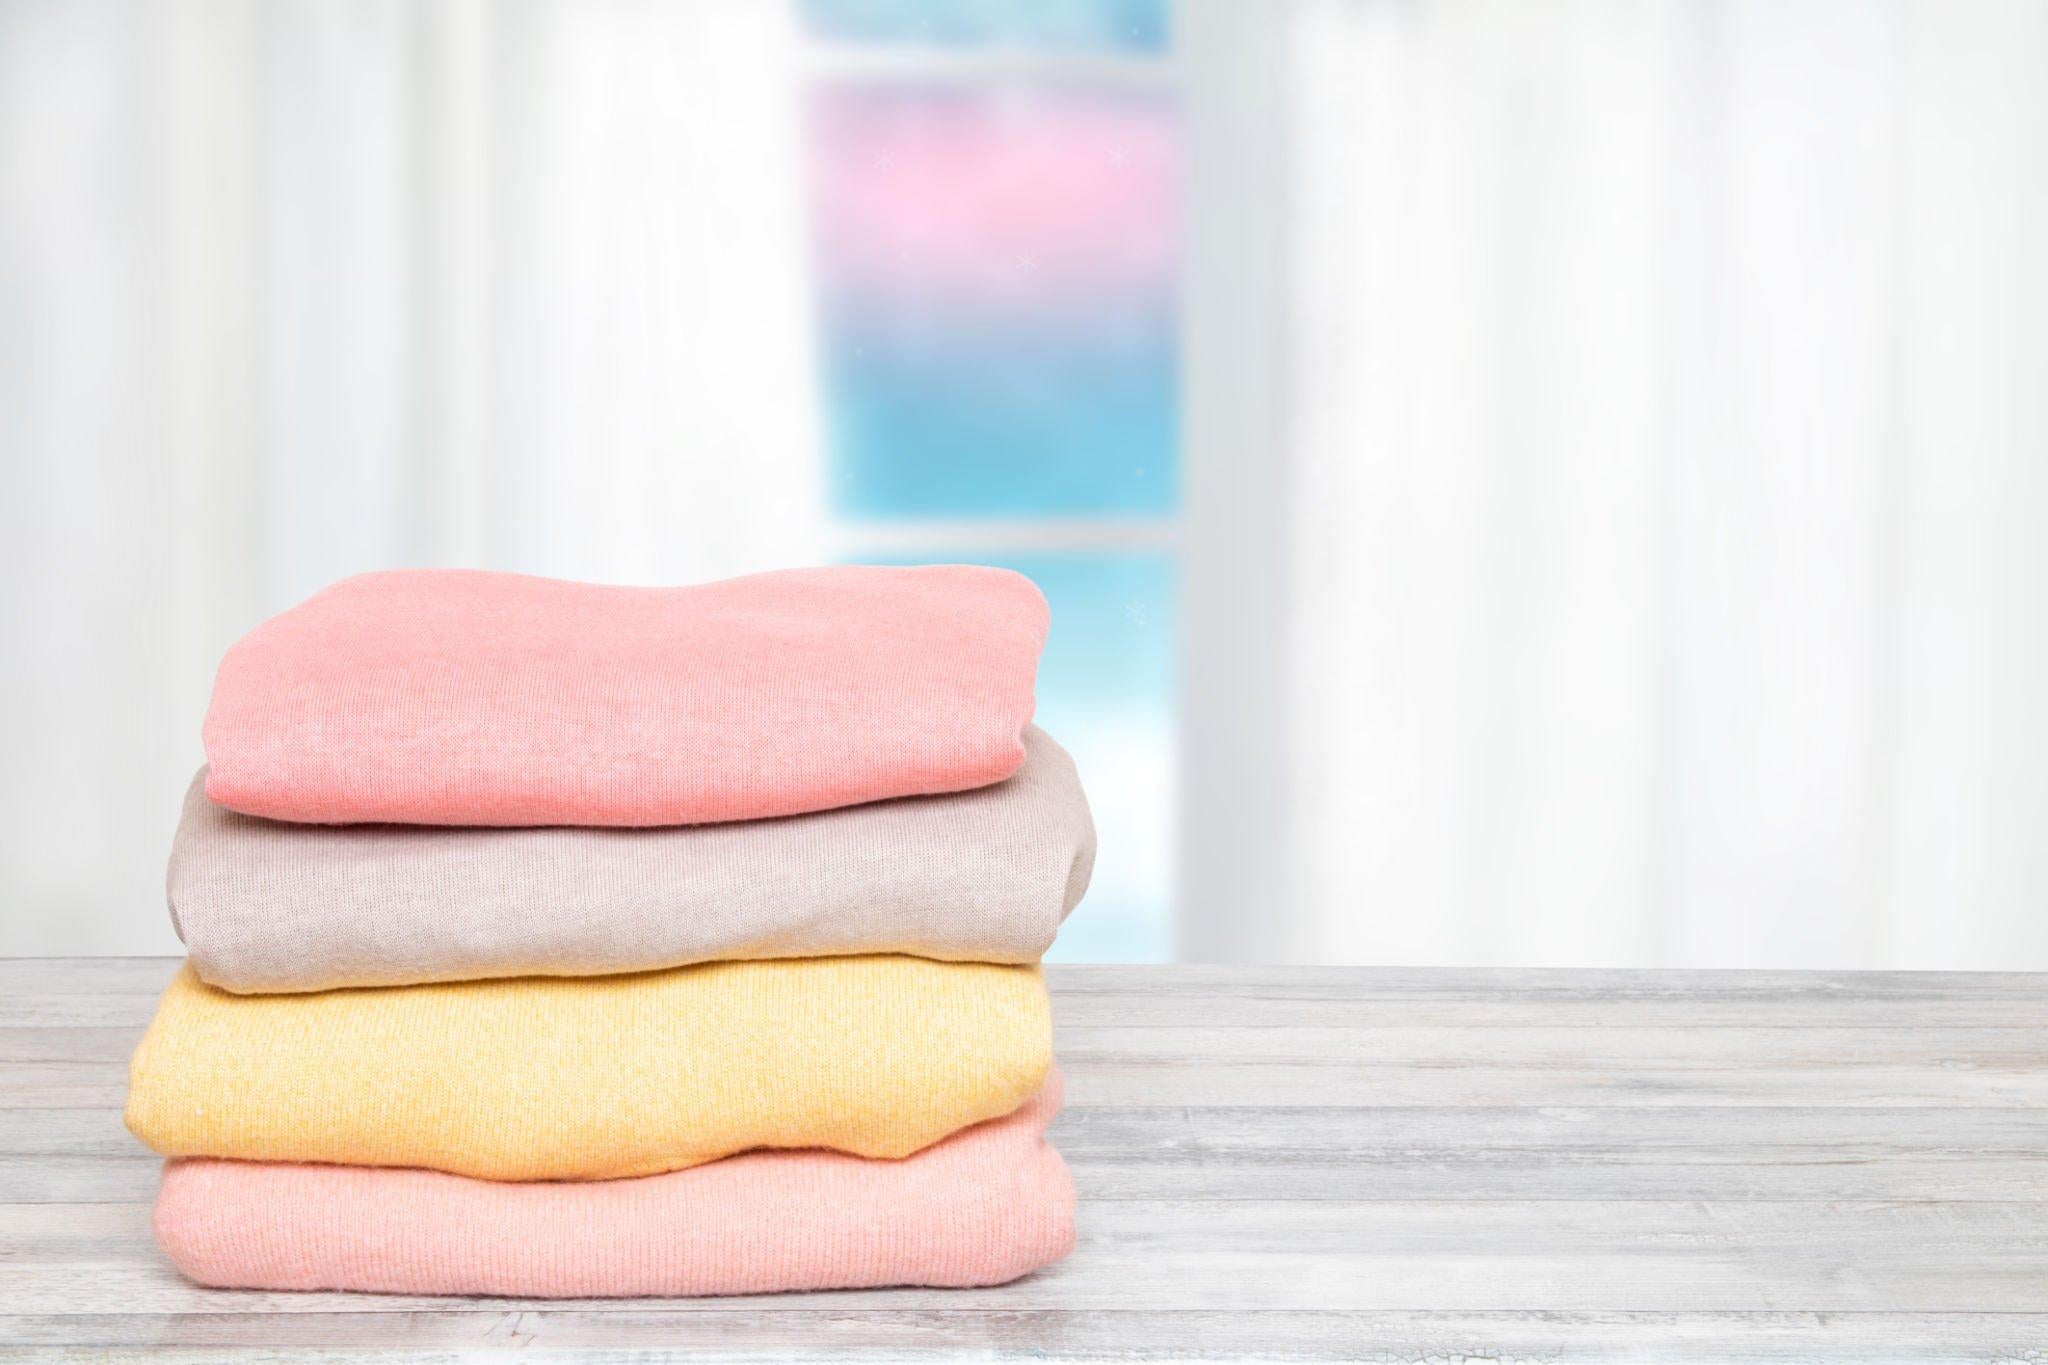 How to Wash Pashmina Shawls and Scarves?